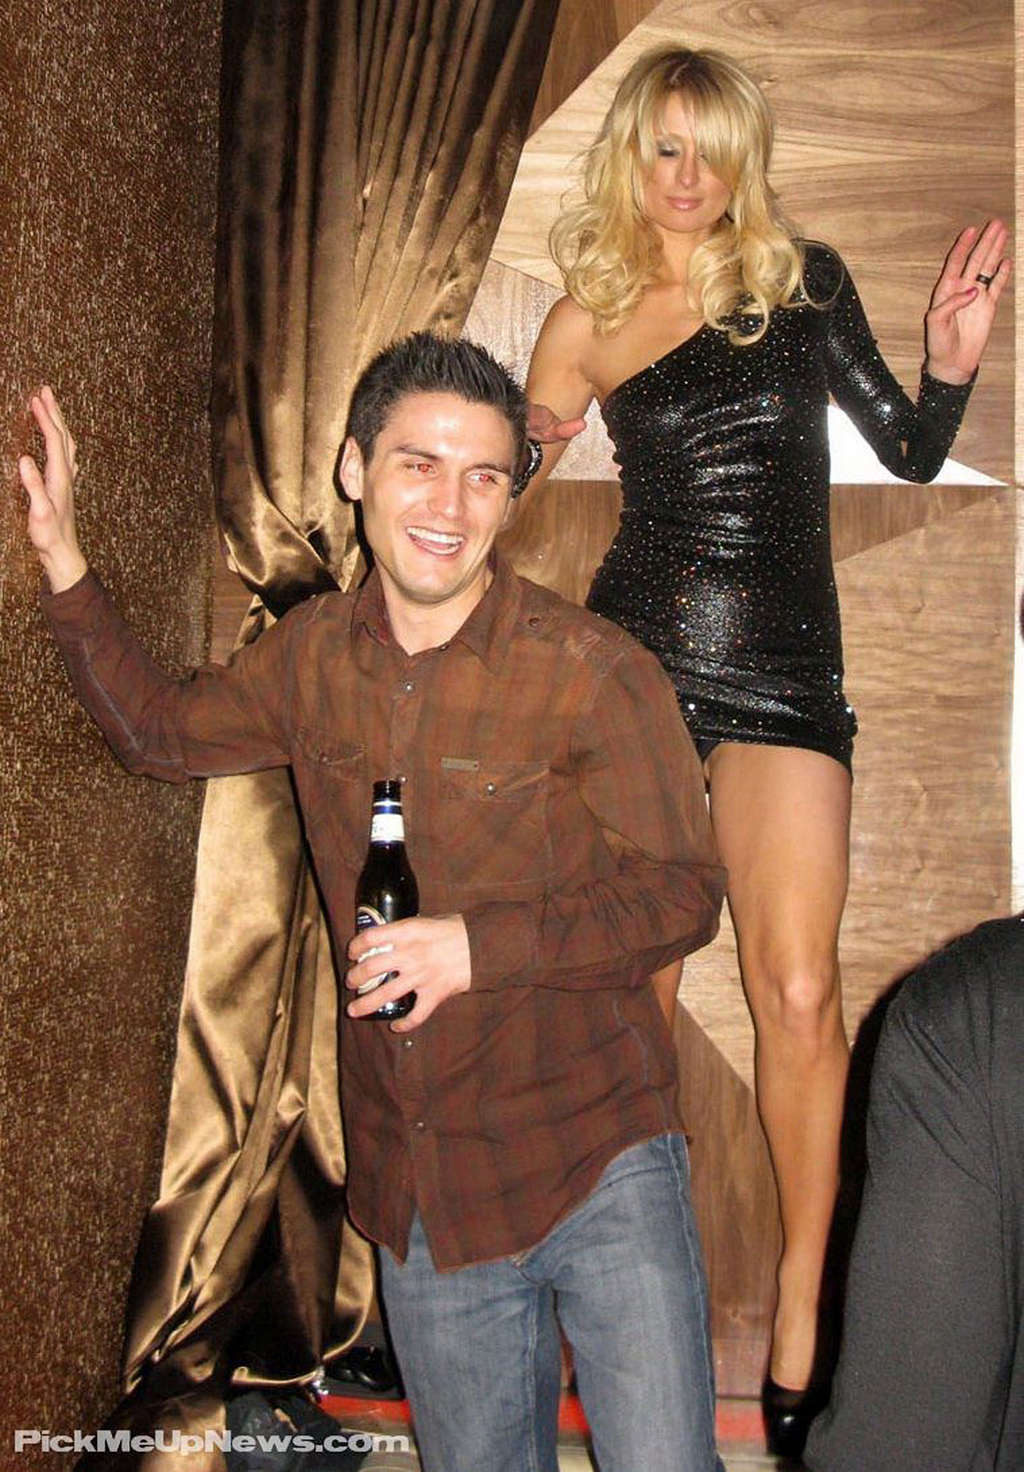 Paris Hilton enjoying on party and showing her sexy body #75359926